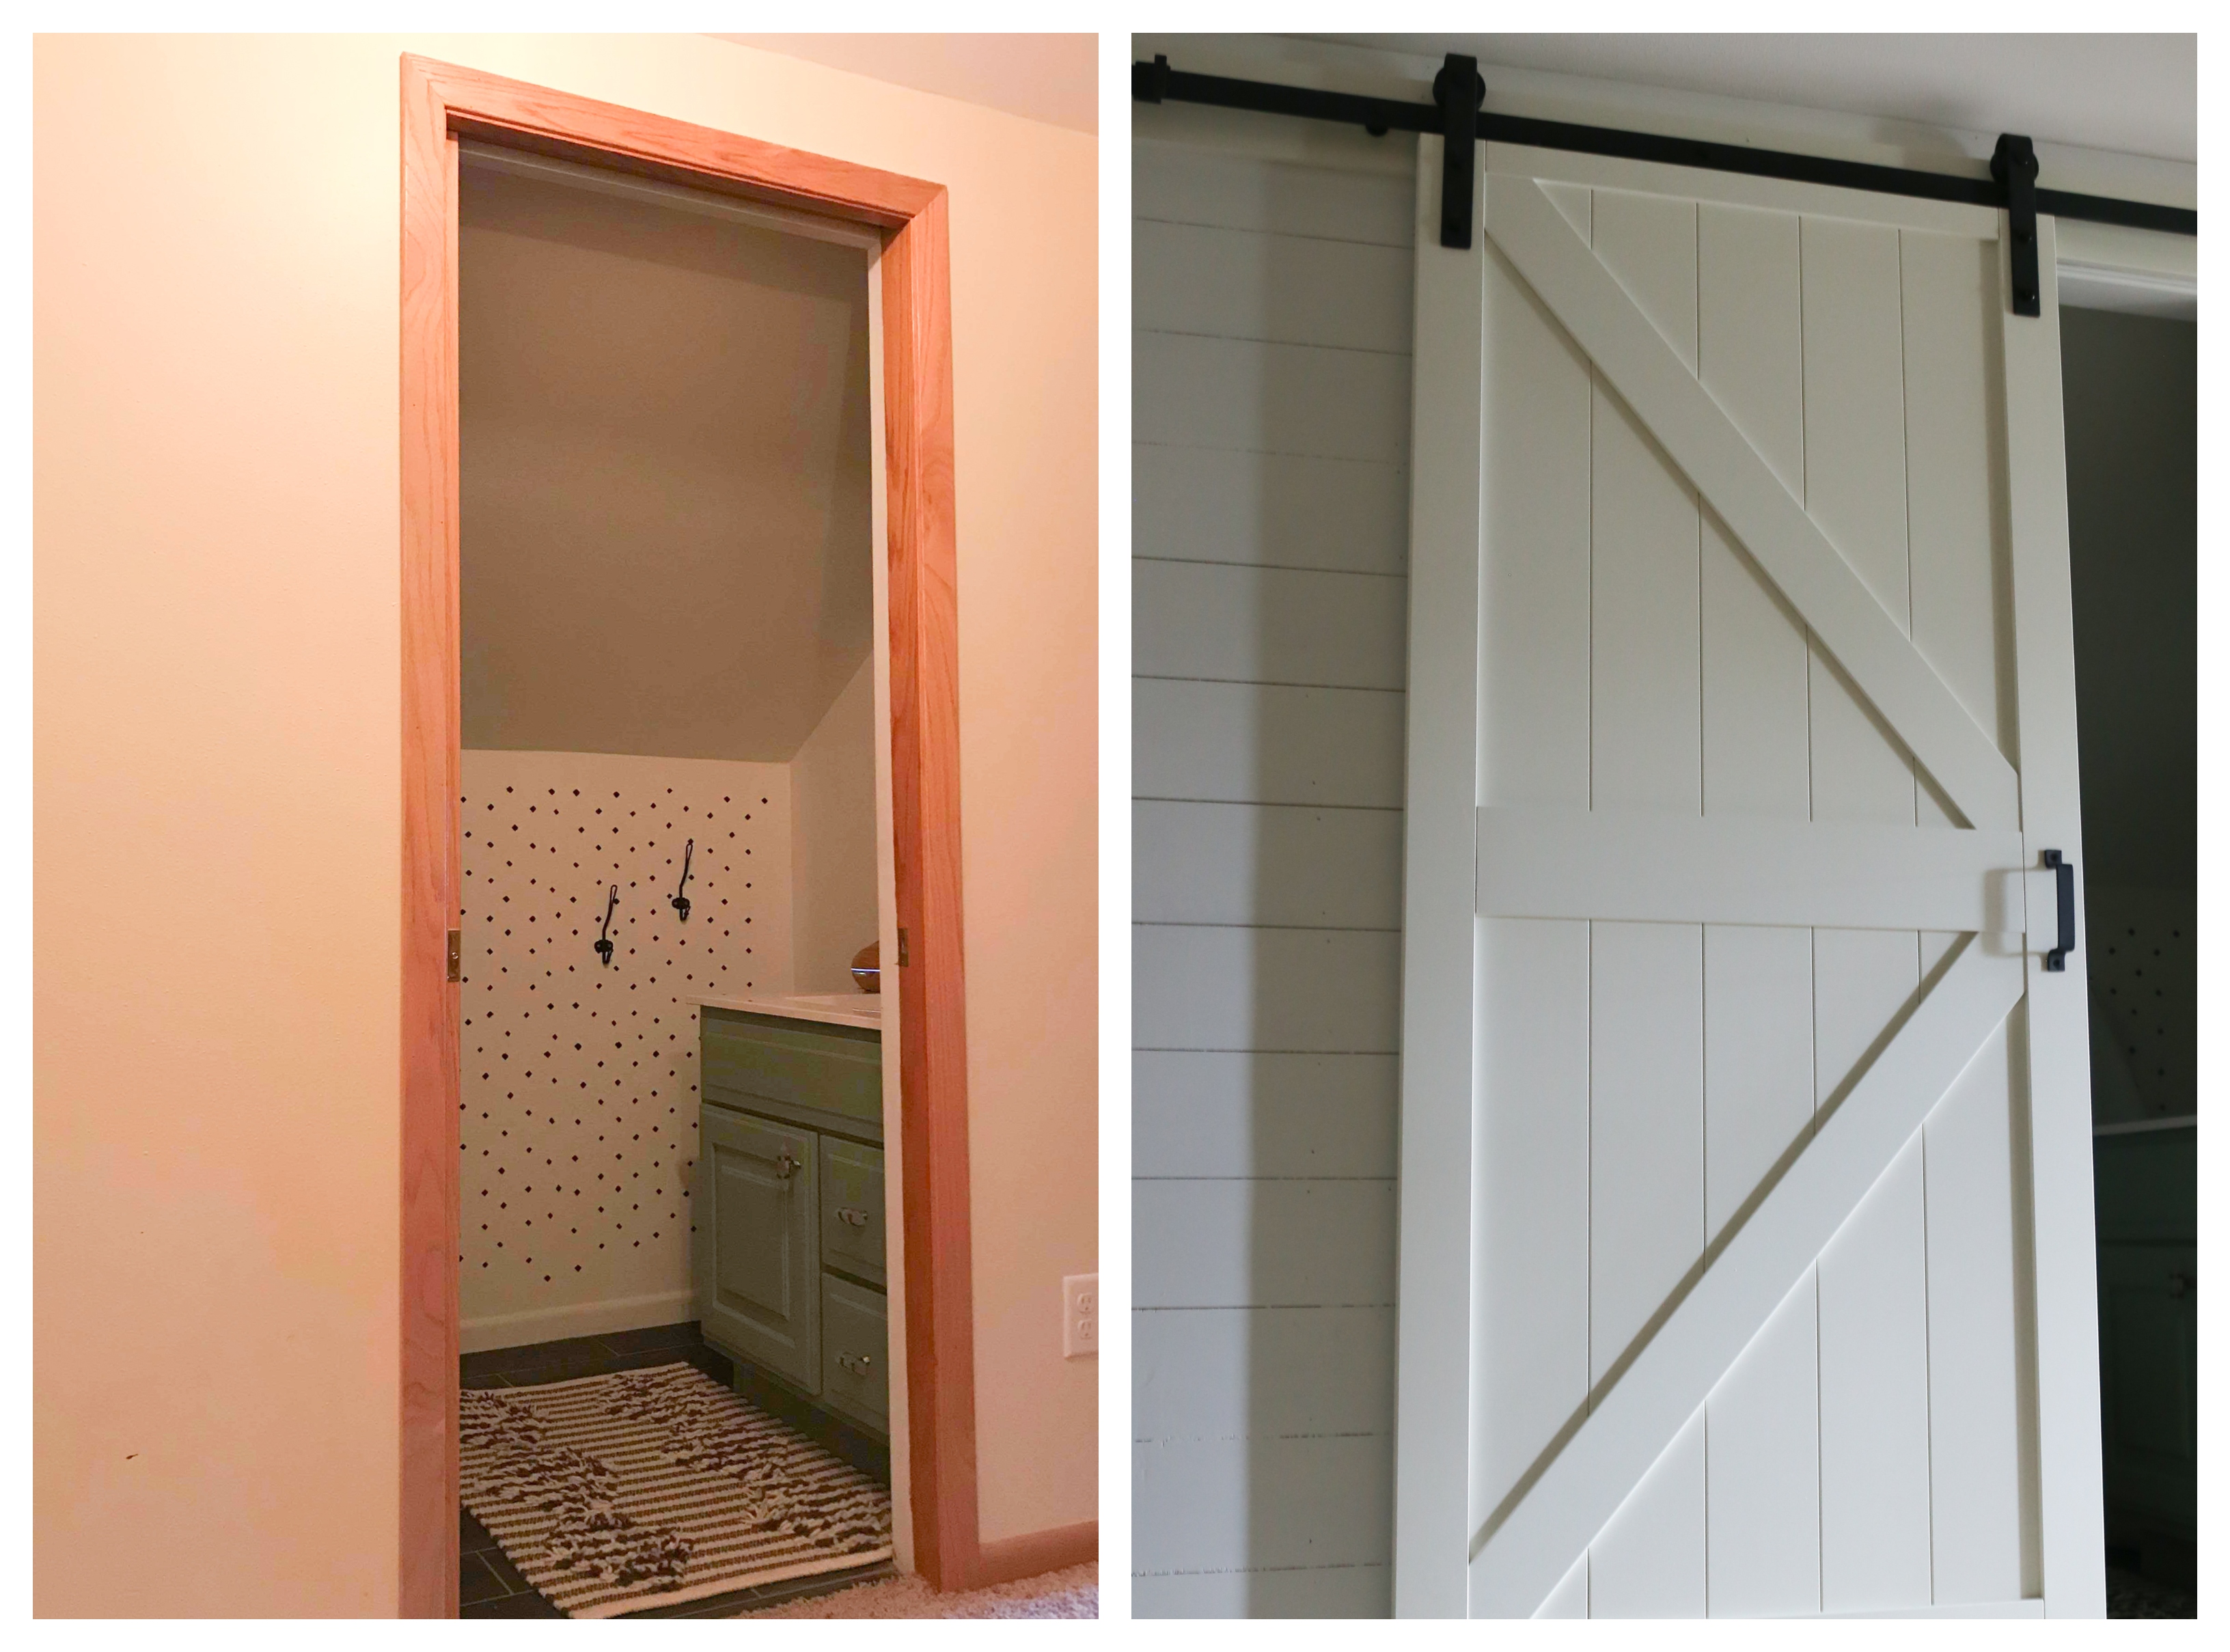 The builder basic hallway is updated with faux shiplap and a sliding barn door.